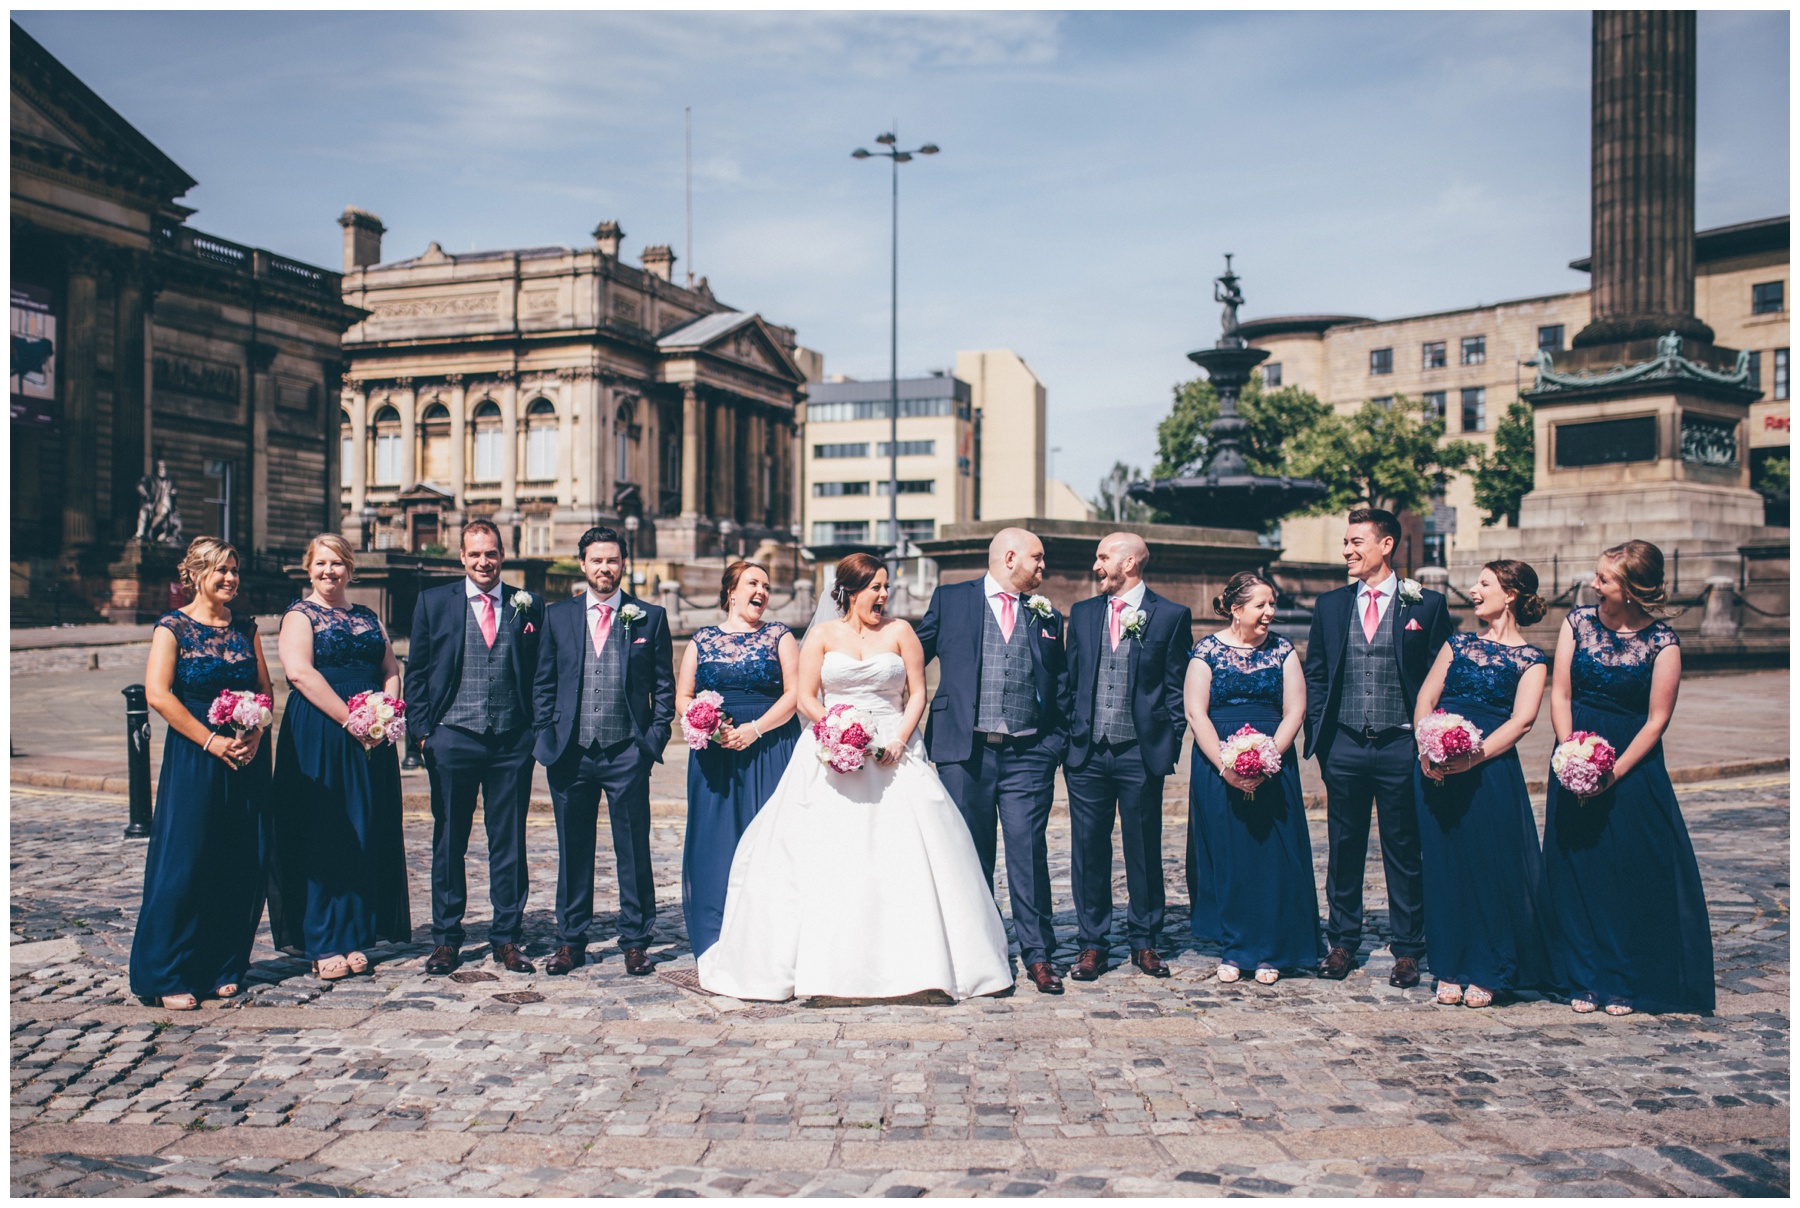 Bride, groom and Their bridal party all together outside St Georges Hall in Liverpool.